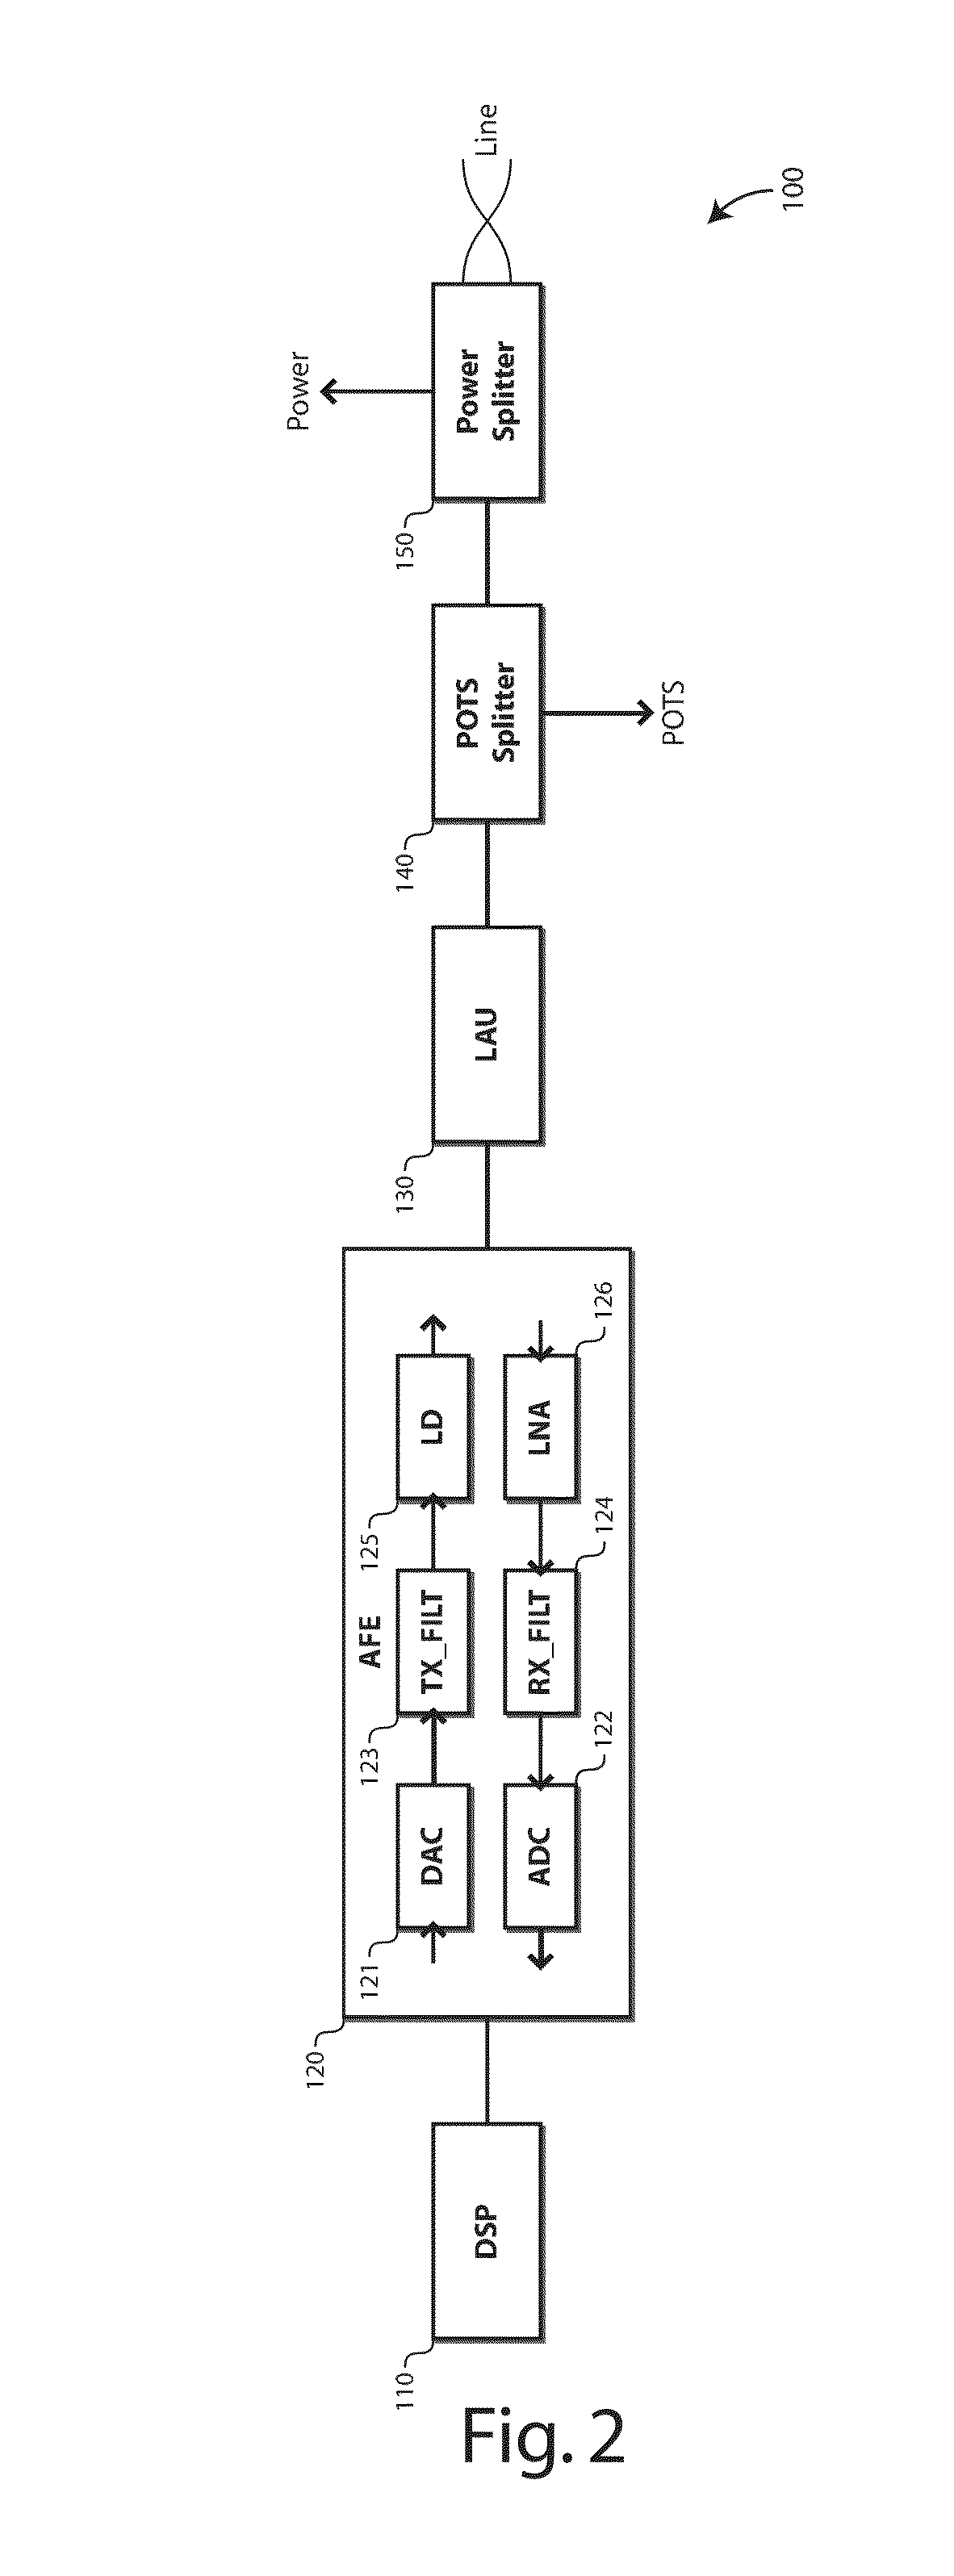 Point-to-multi-point transmission over a wired loop plant